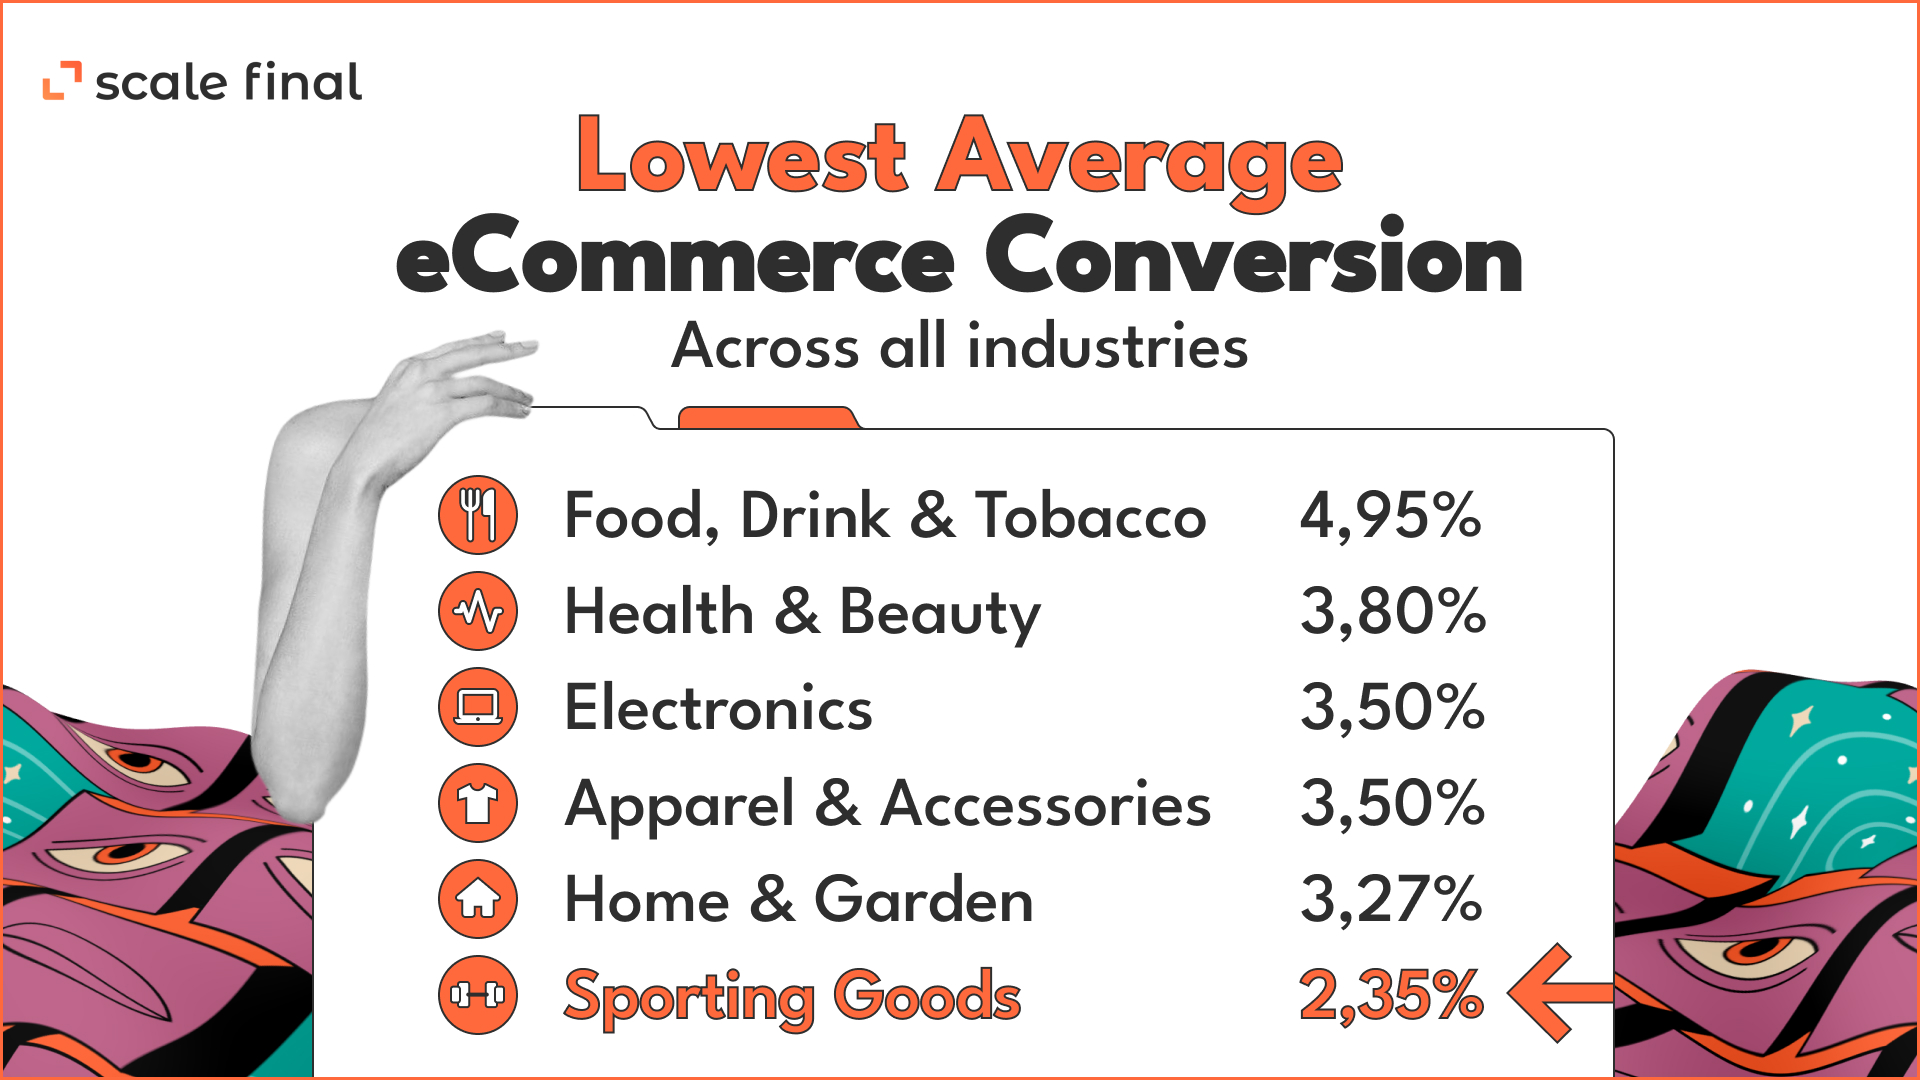 Lowest Average eCommerce Conversion across all industries 